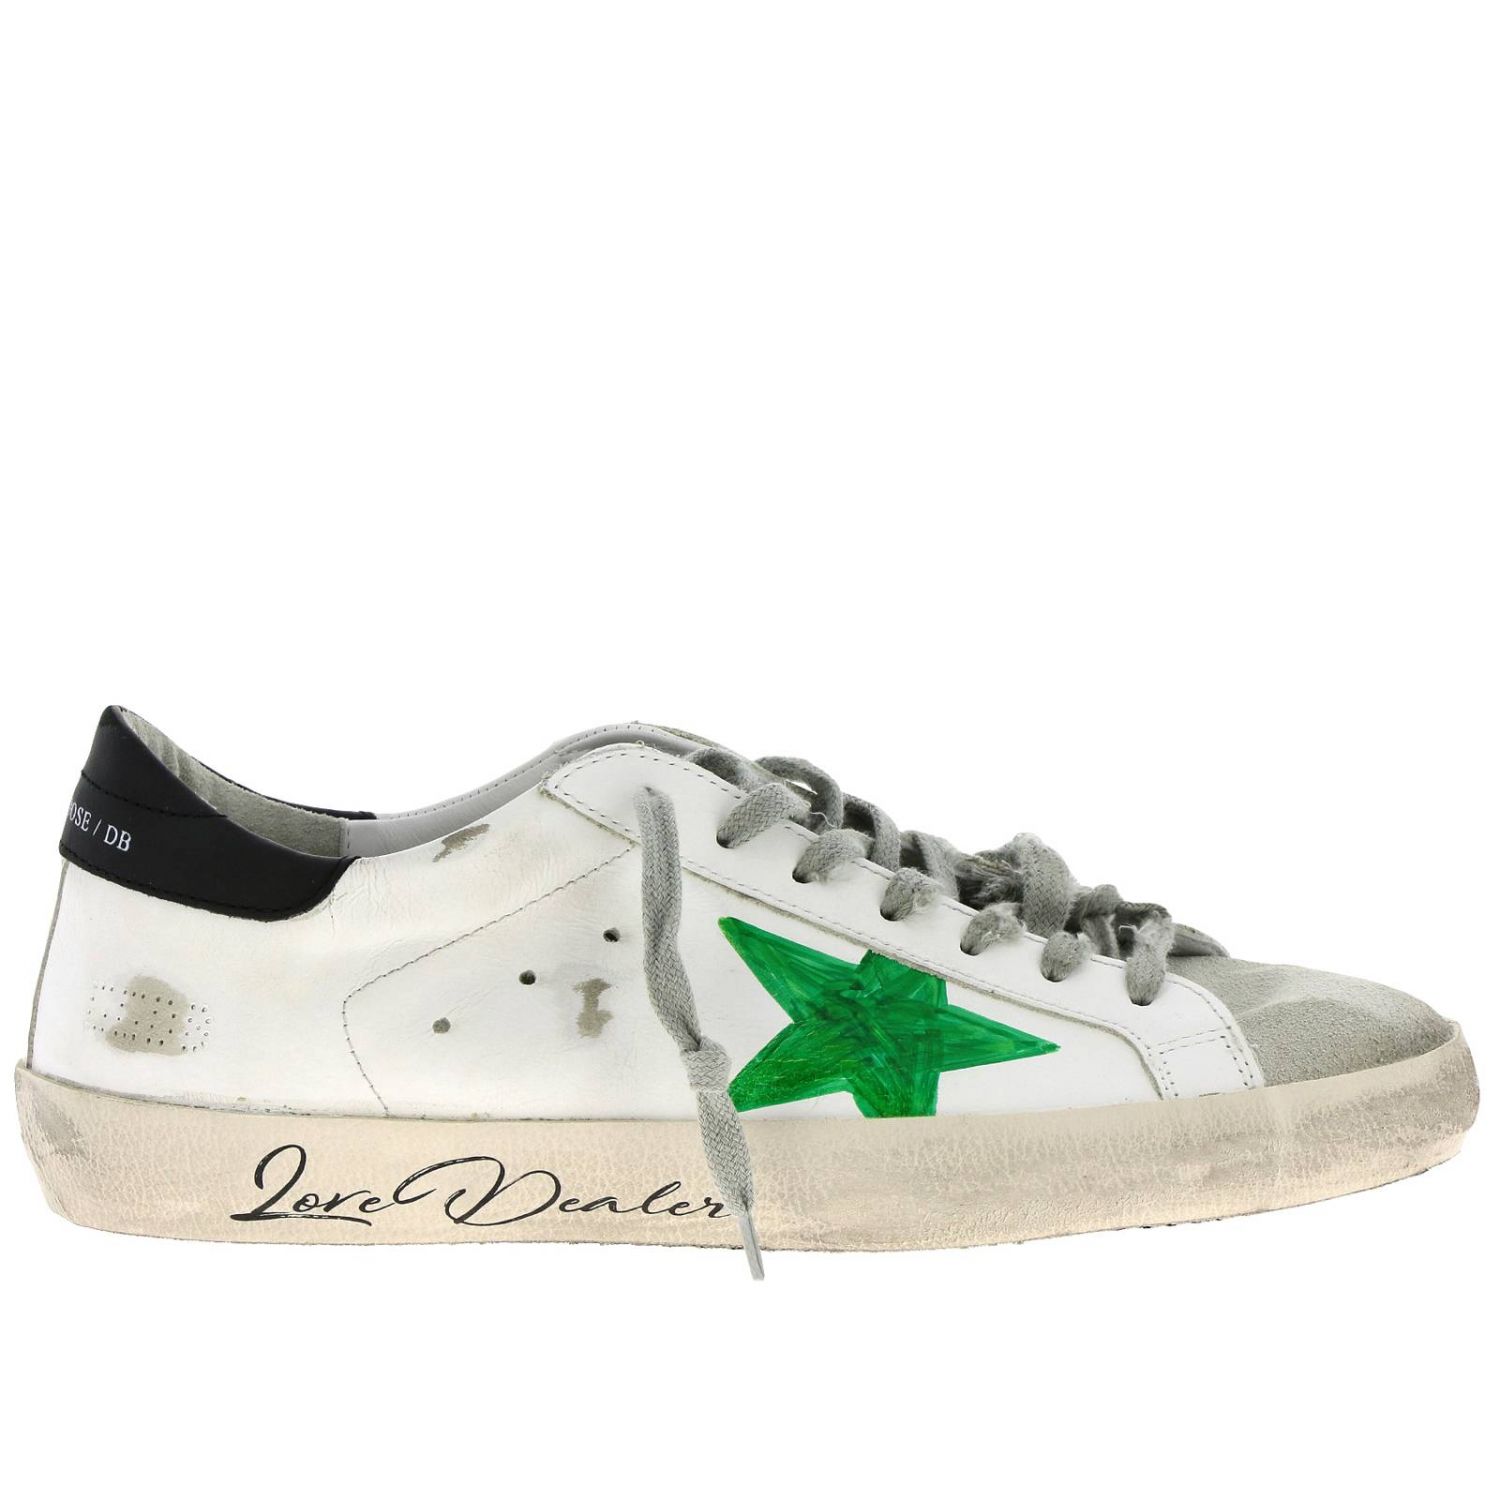 Golden Goose Outlet: sneakers for man - White | Golden Goose sneakers ...